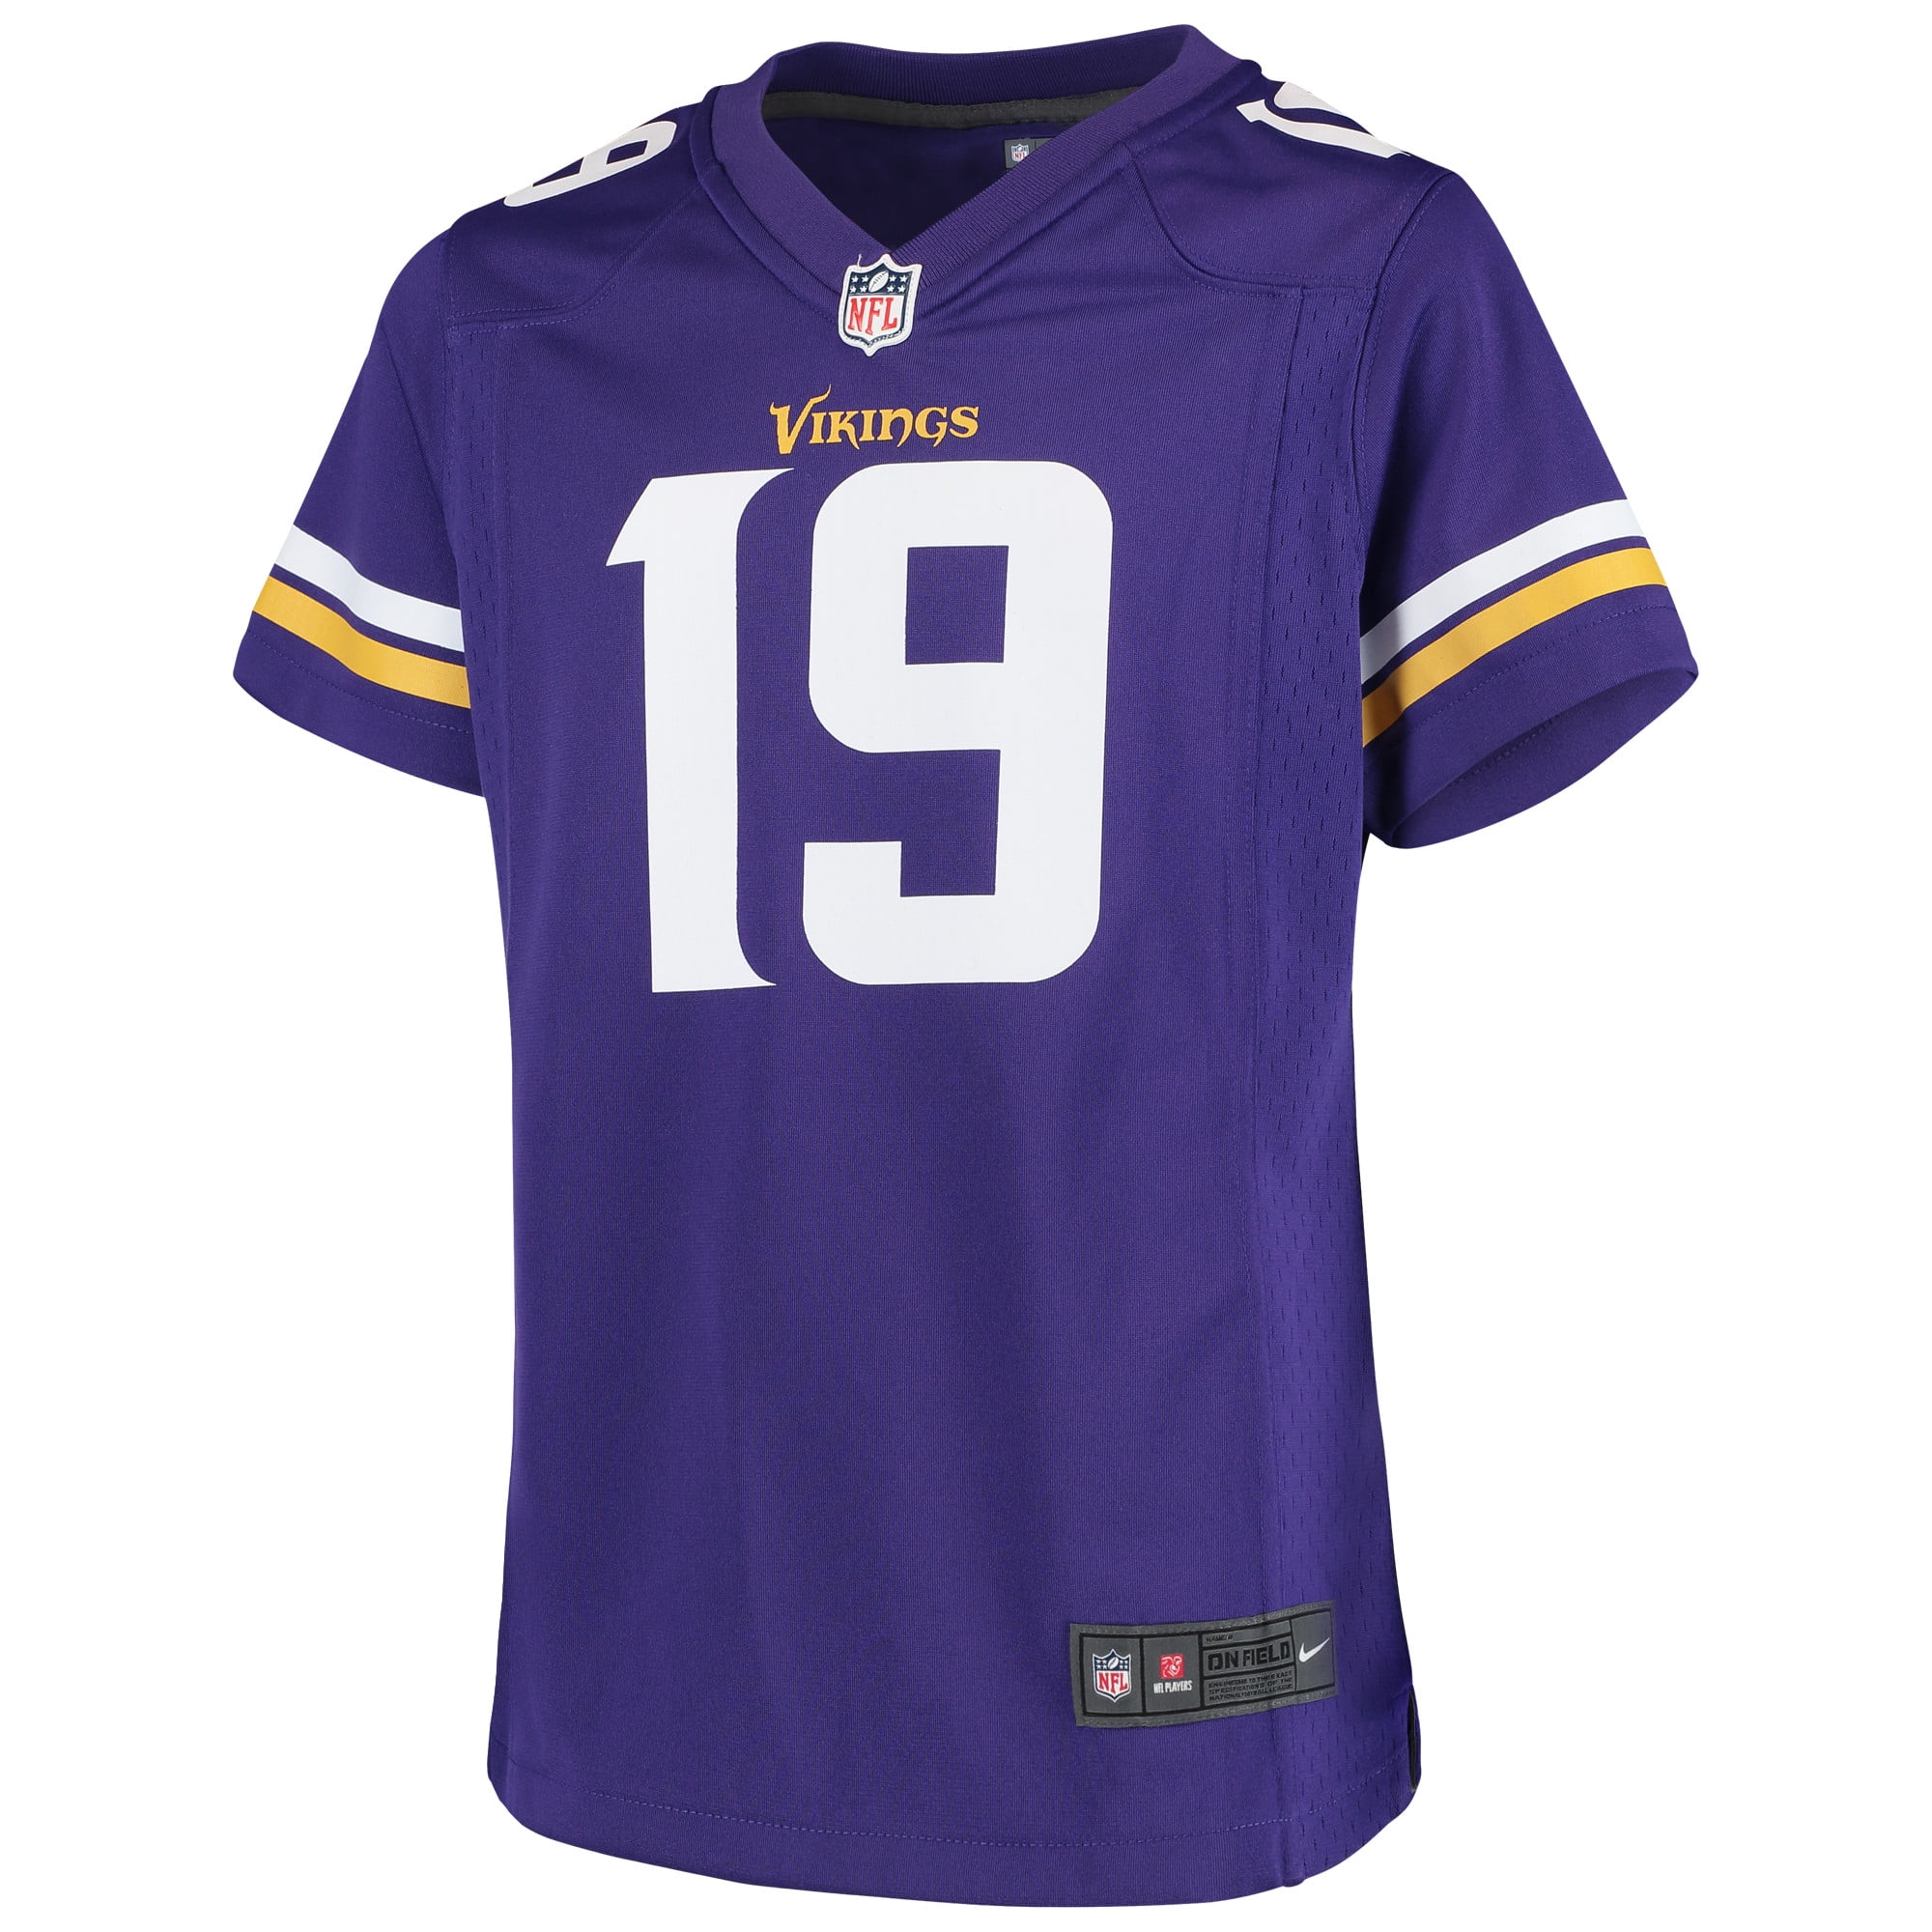 vikings jersey with my name on it